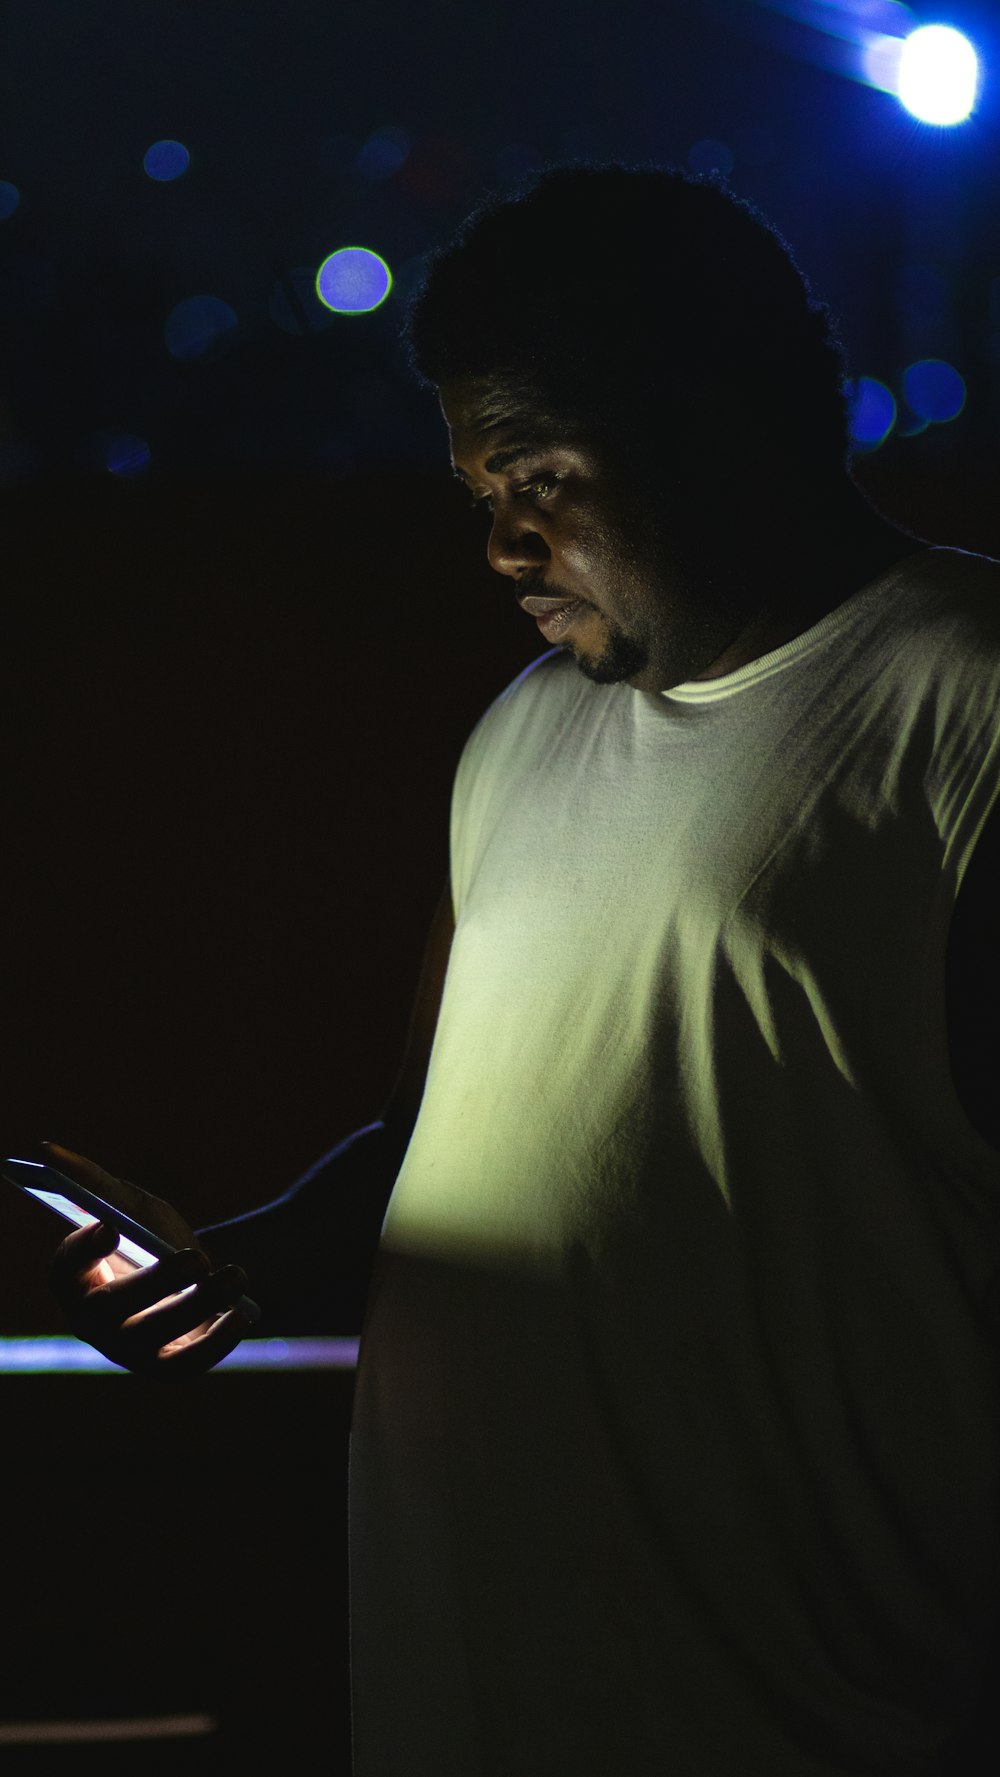 a man standing in the dark holding a cell phone